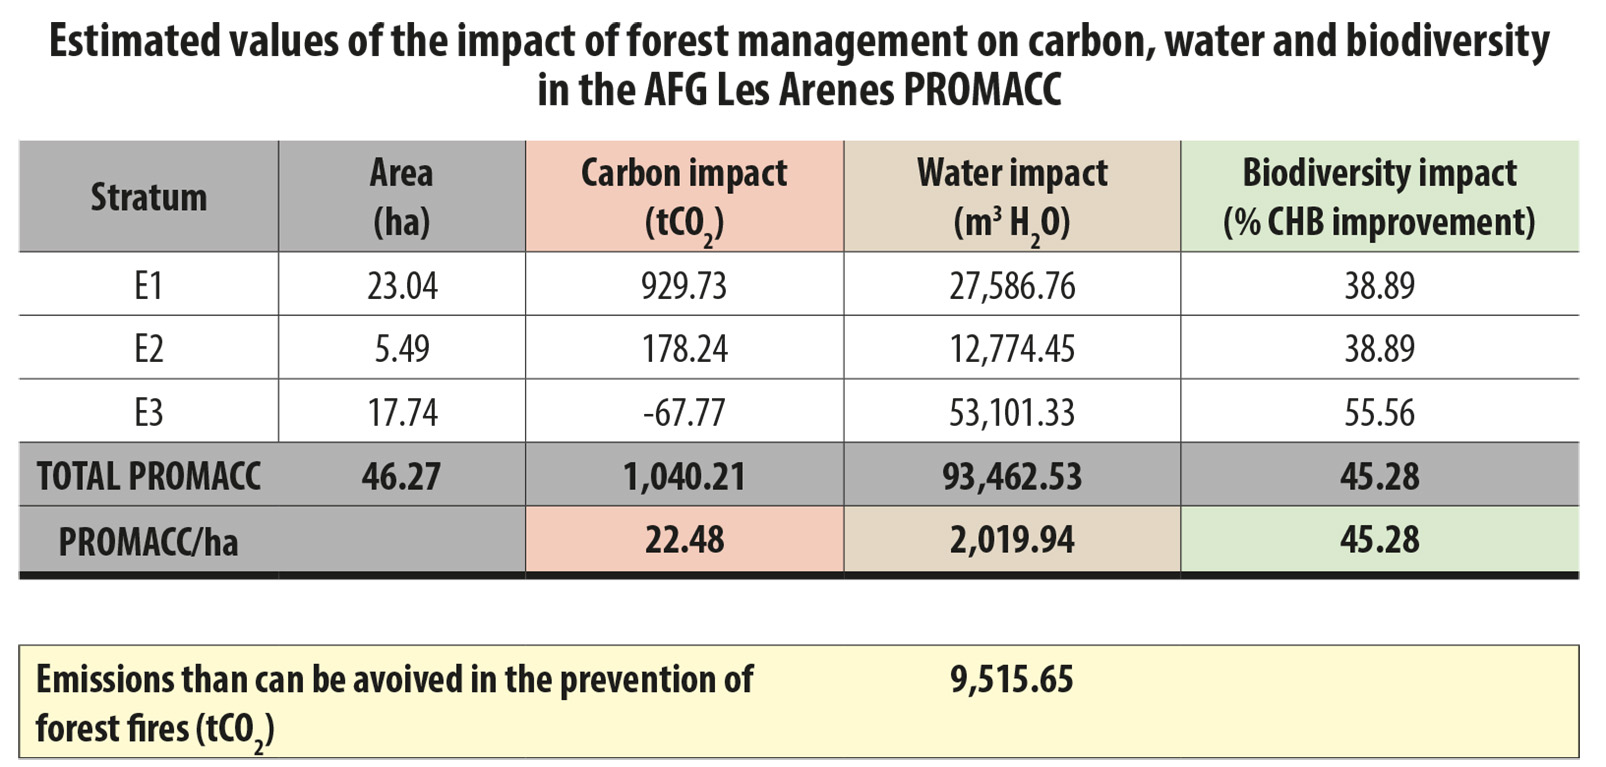 Impact of forest management on carbon, water and biodiversity in the AFG Les Arenes PROMACC